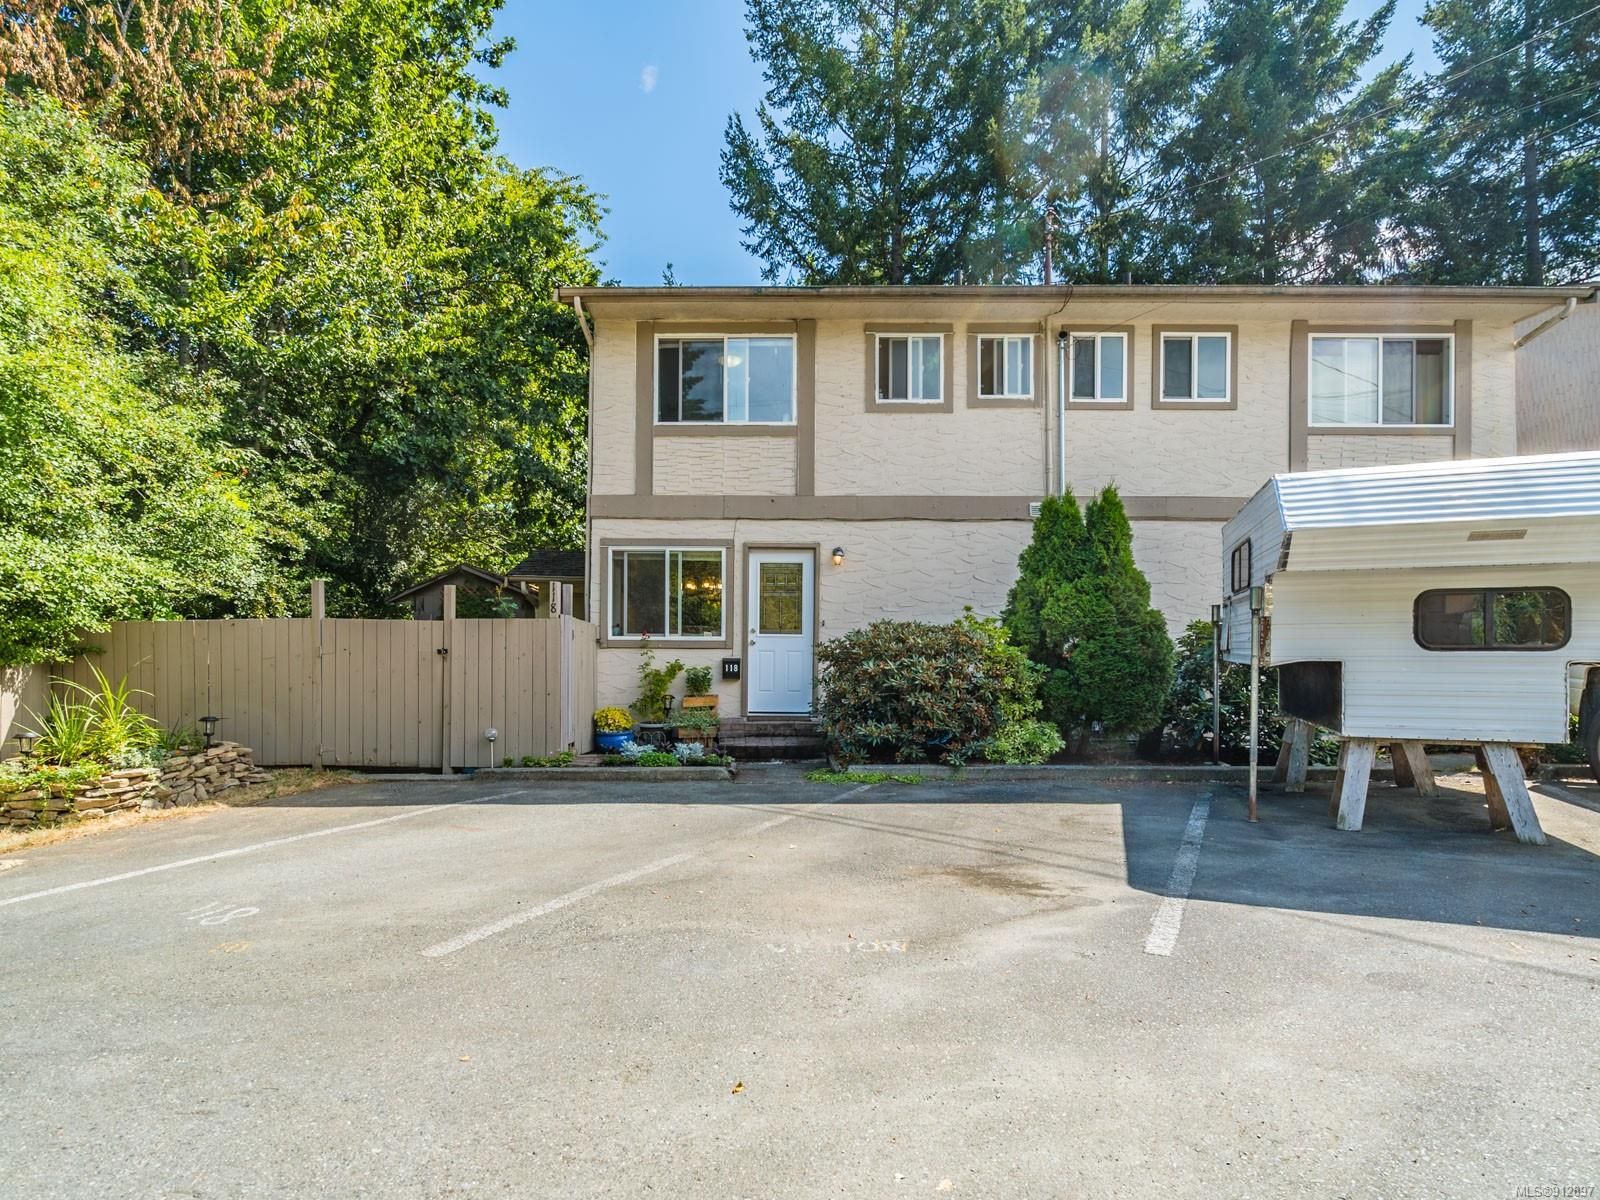 I have sold a property at 118 Adams Ave in Nanaimo
